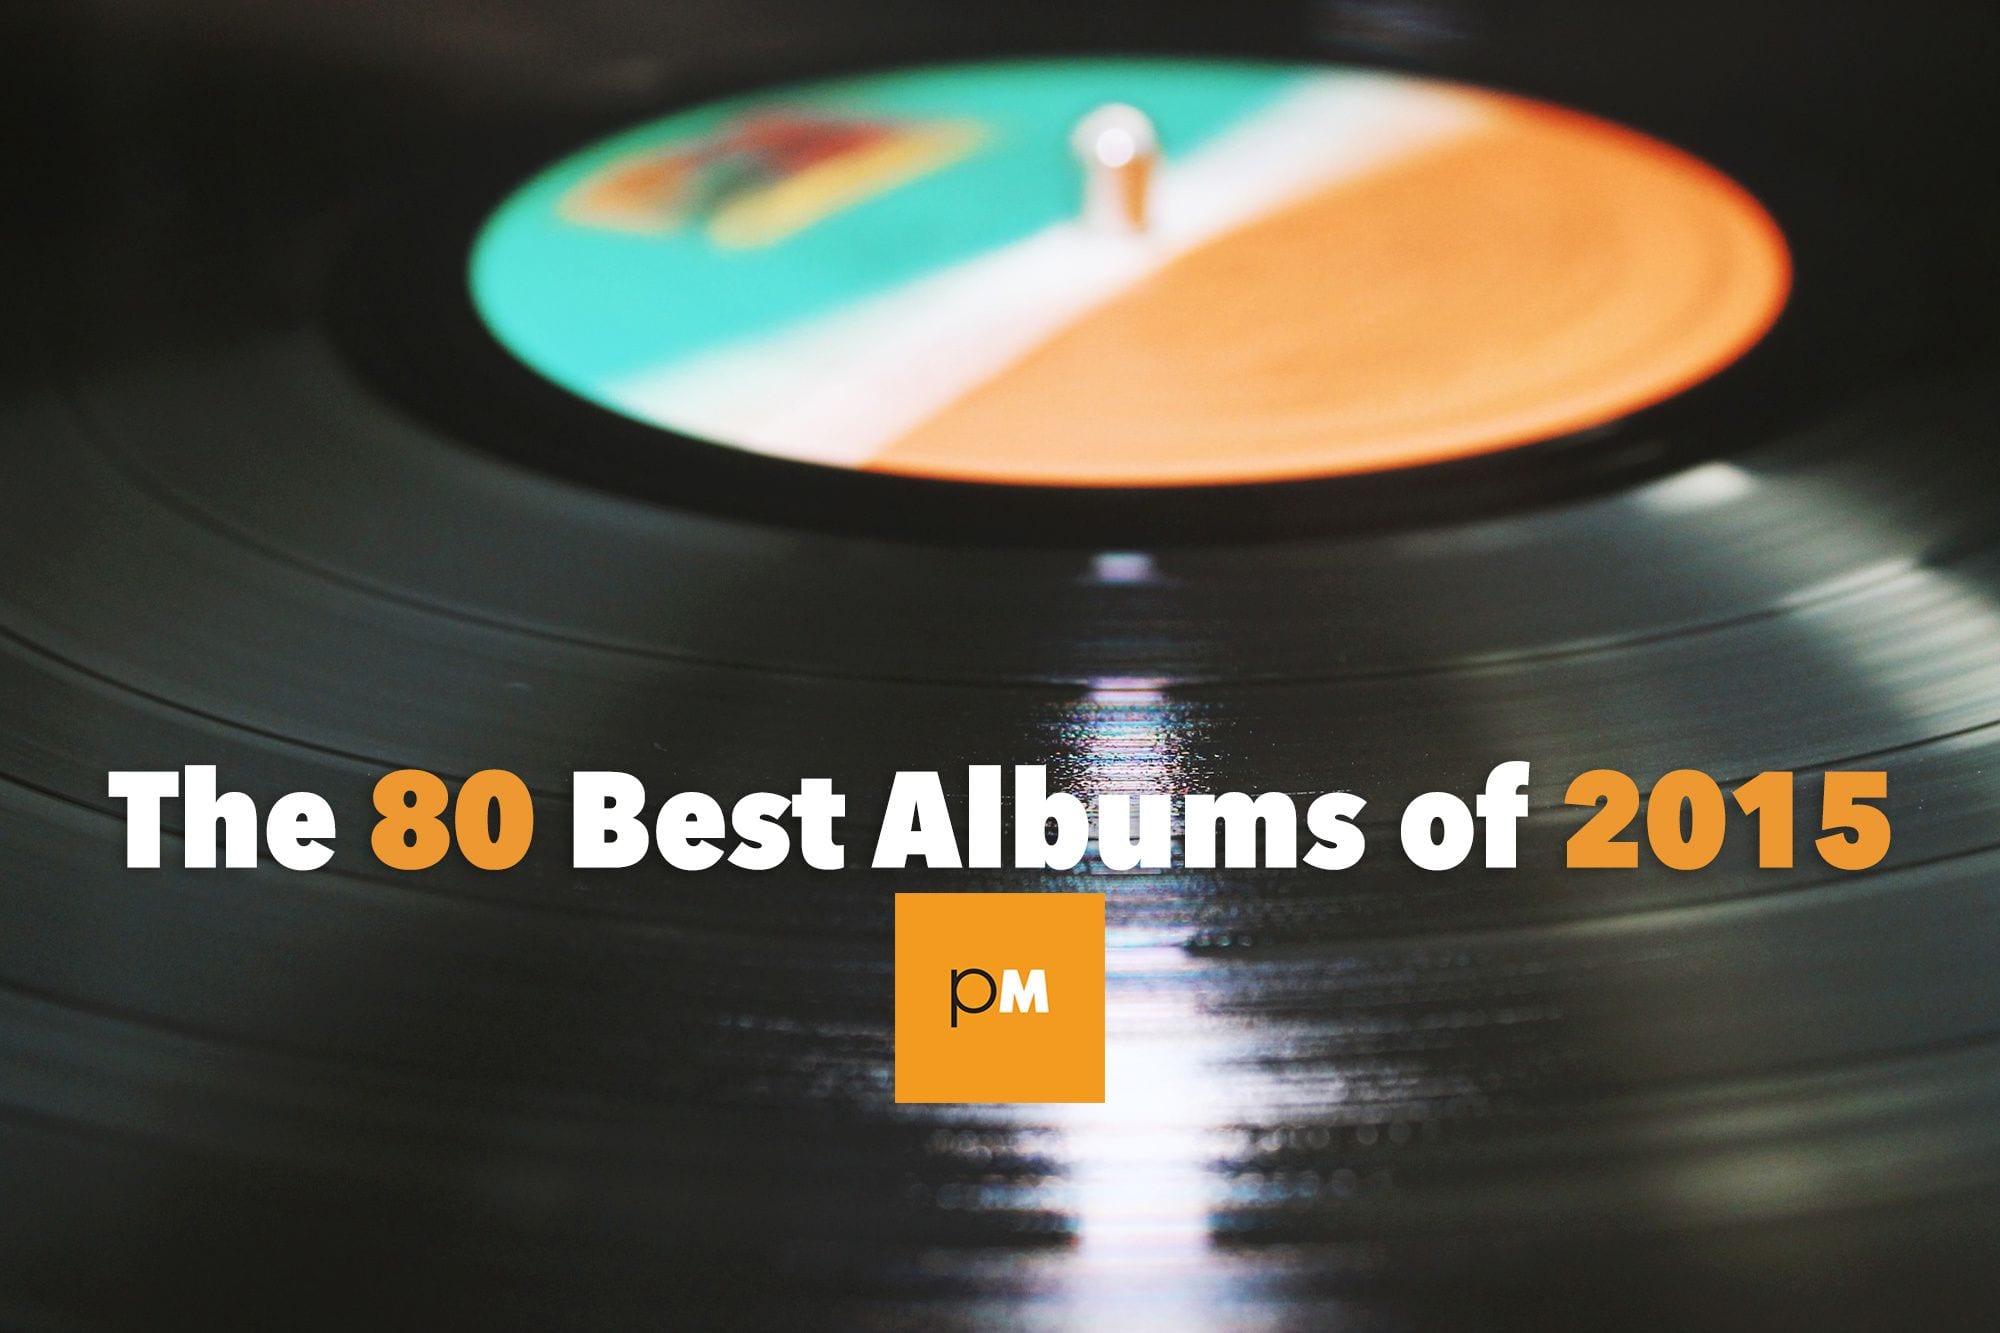 The 80 Best Albums of 2015